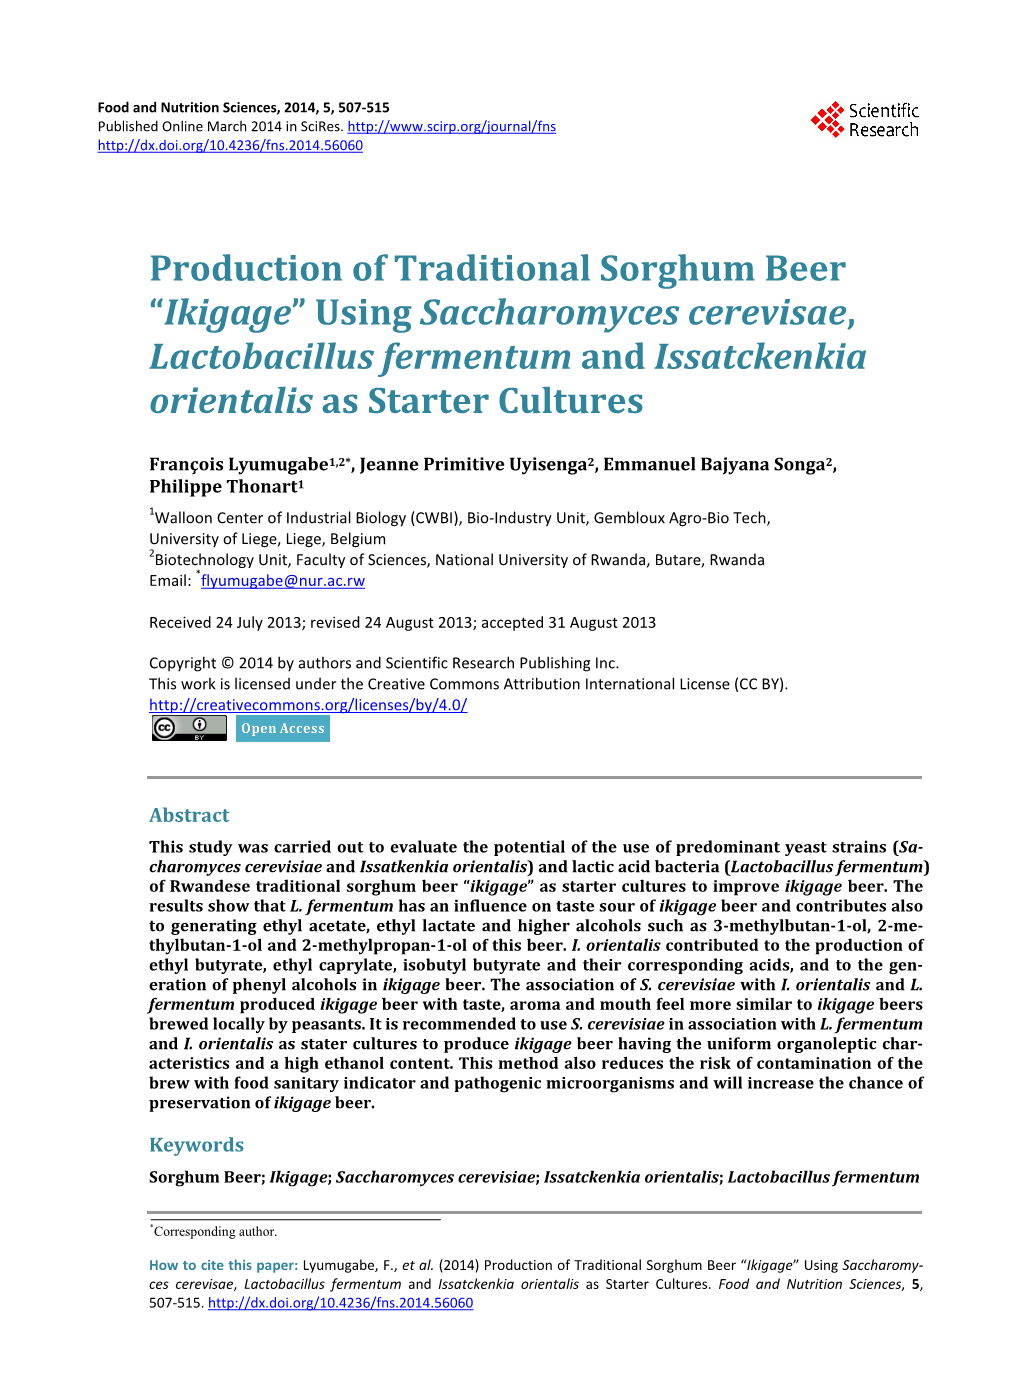 Production of Traditional Sorghum Beer “Ikigage” Using Saccharomyces Cerevisae, Lactobacillus Fermentum and Issatckenkia Orientalis As Starter Cultures